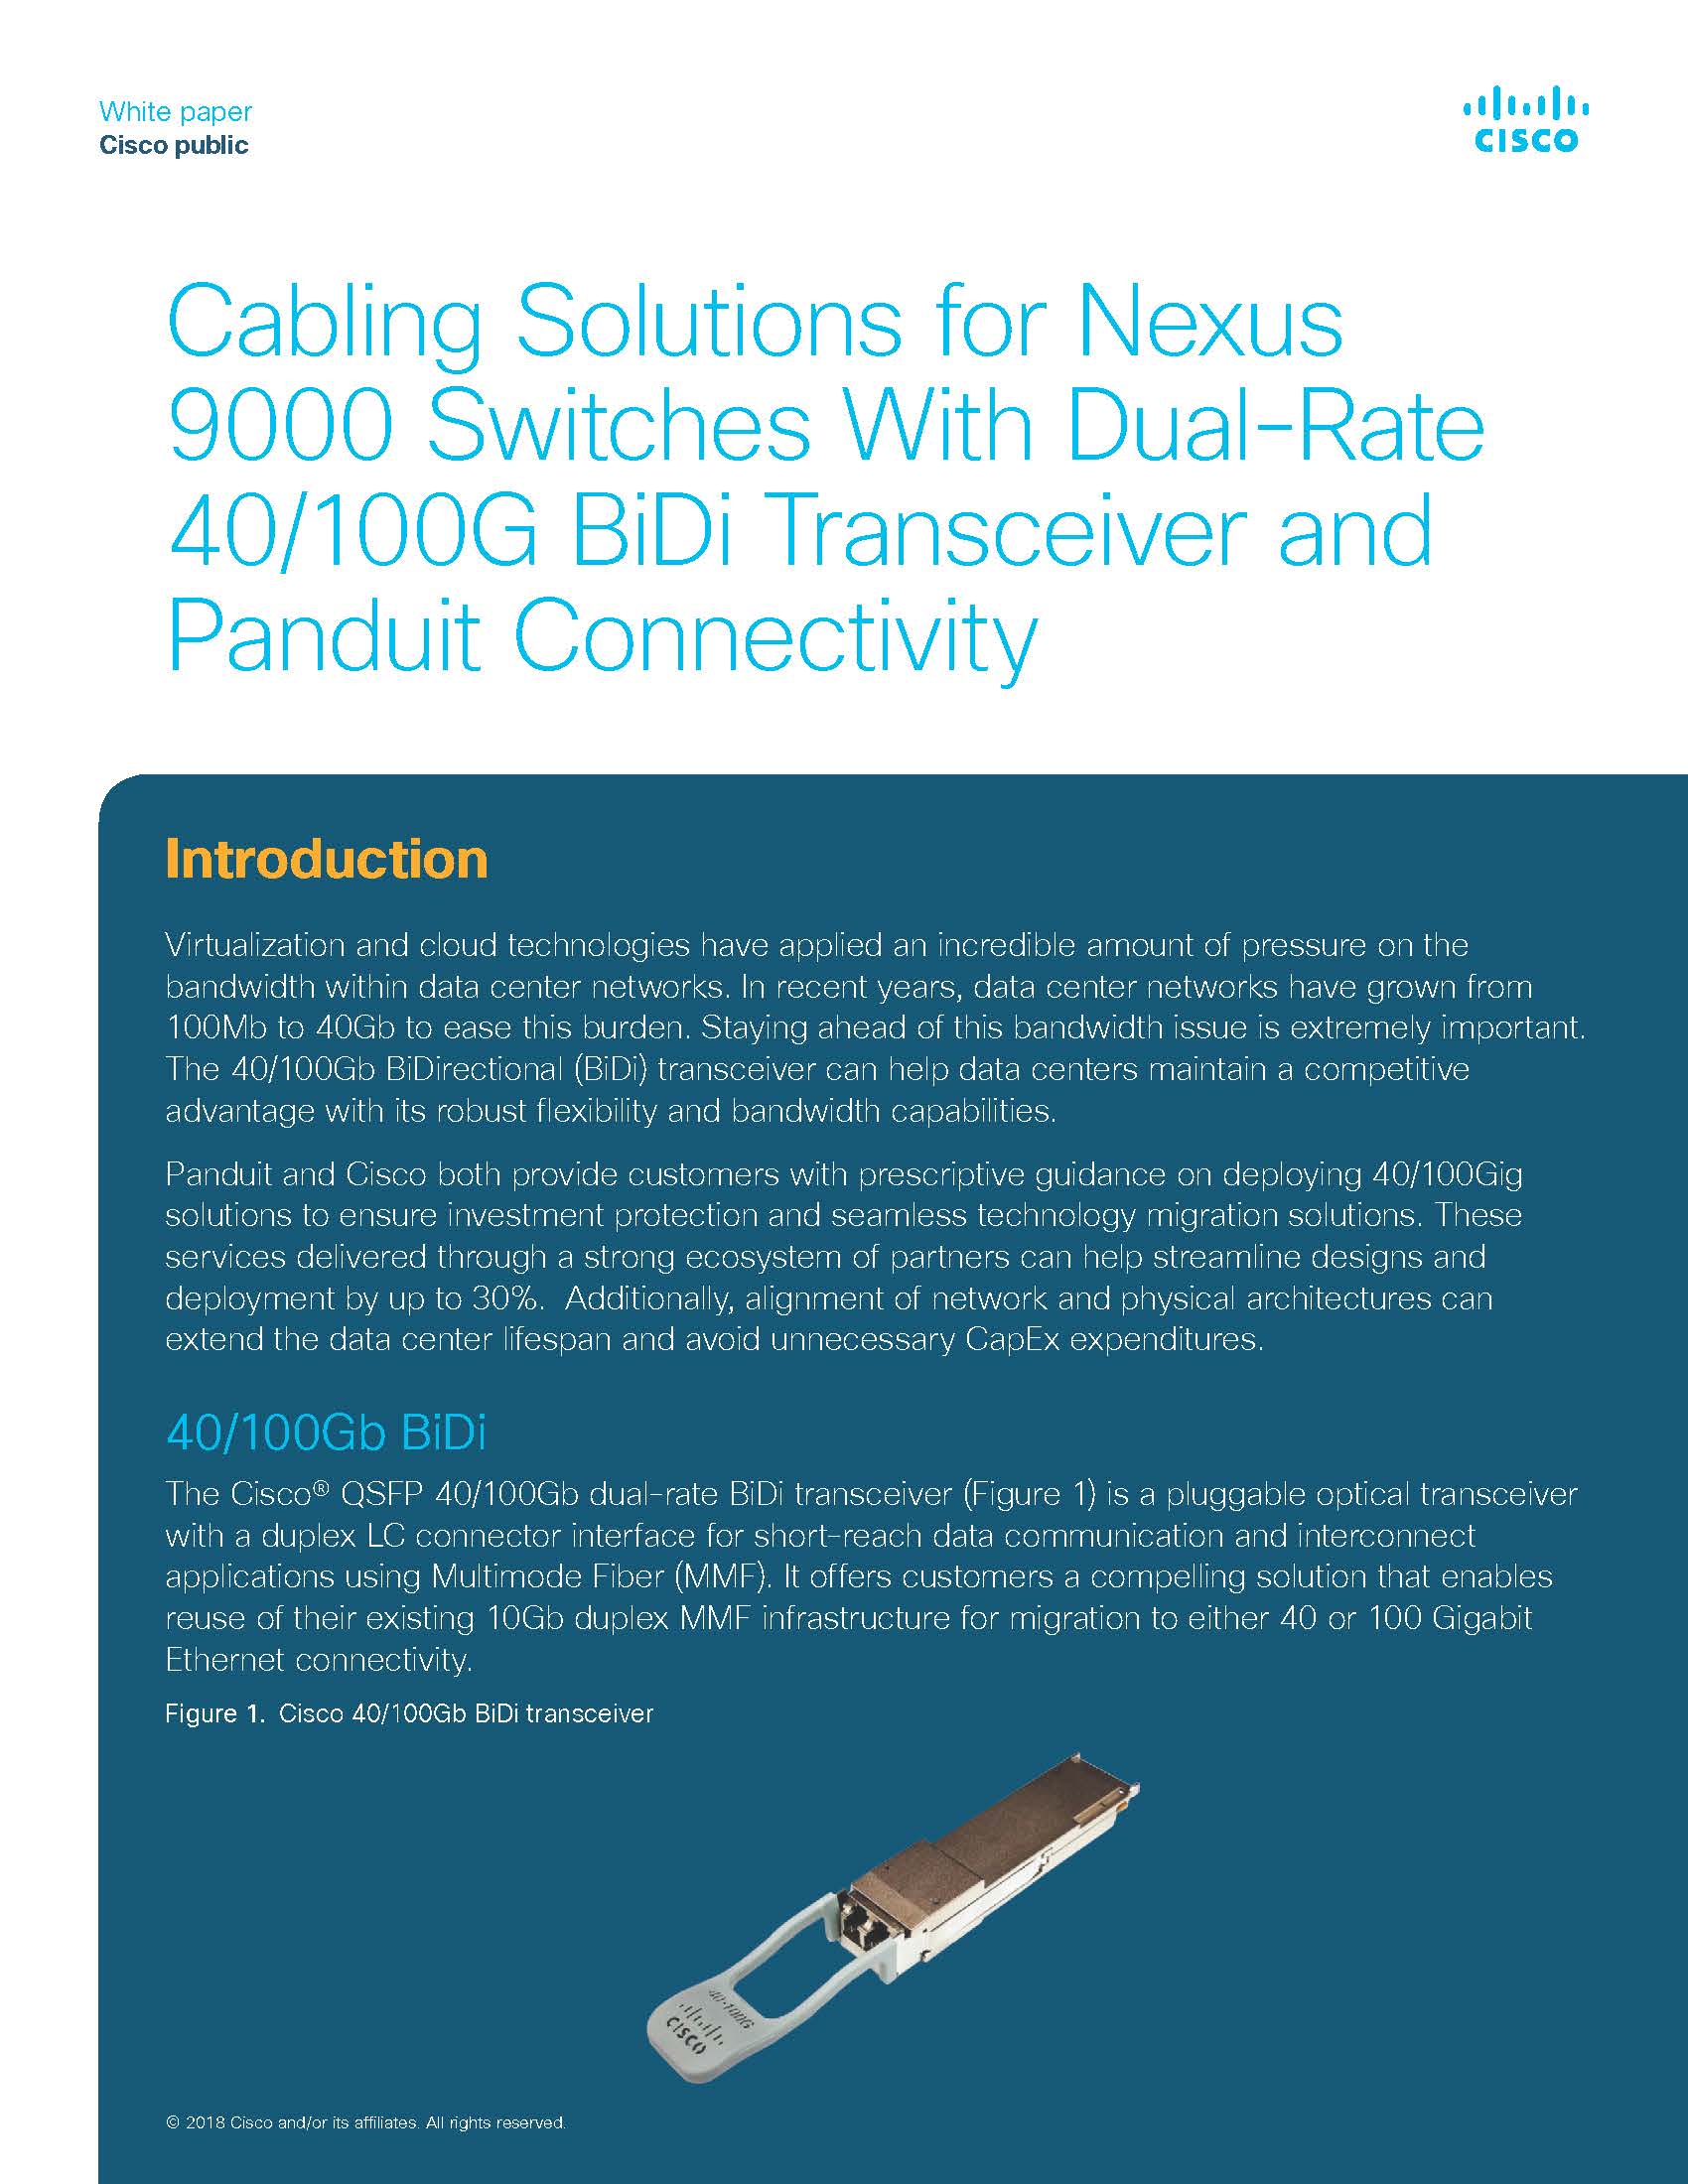 Cabling Solutions for Nexus 9000 Switches Cisco Transceivers